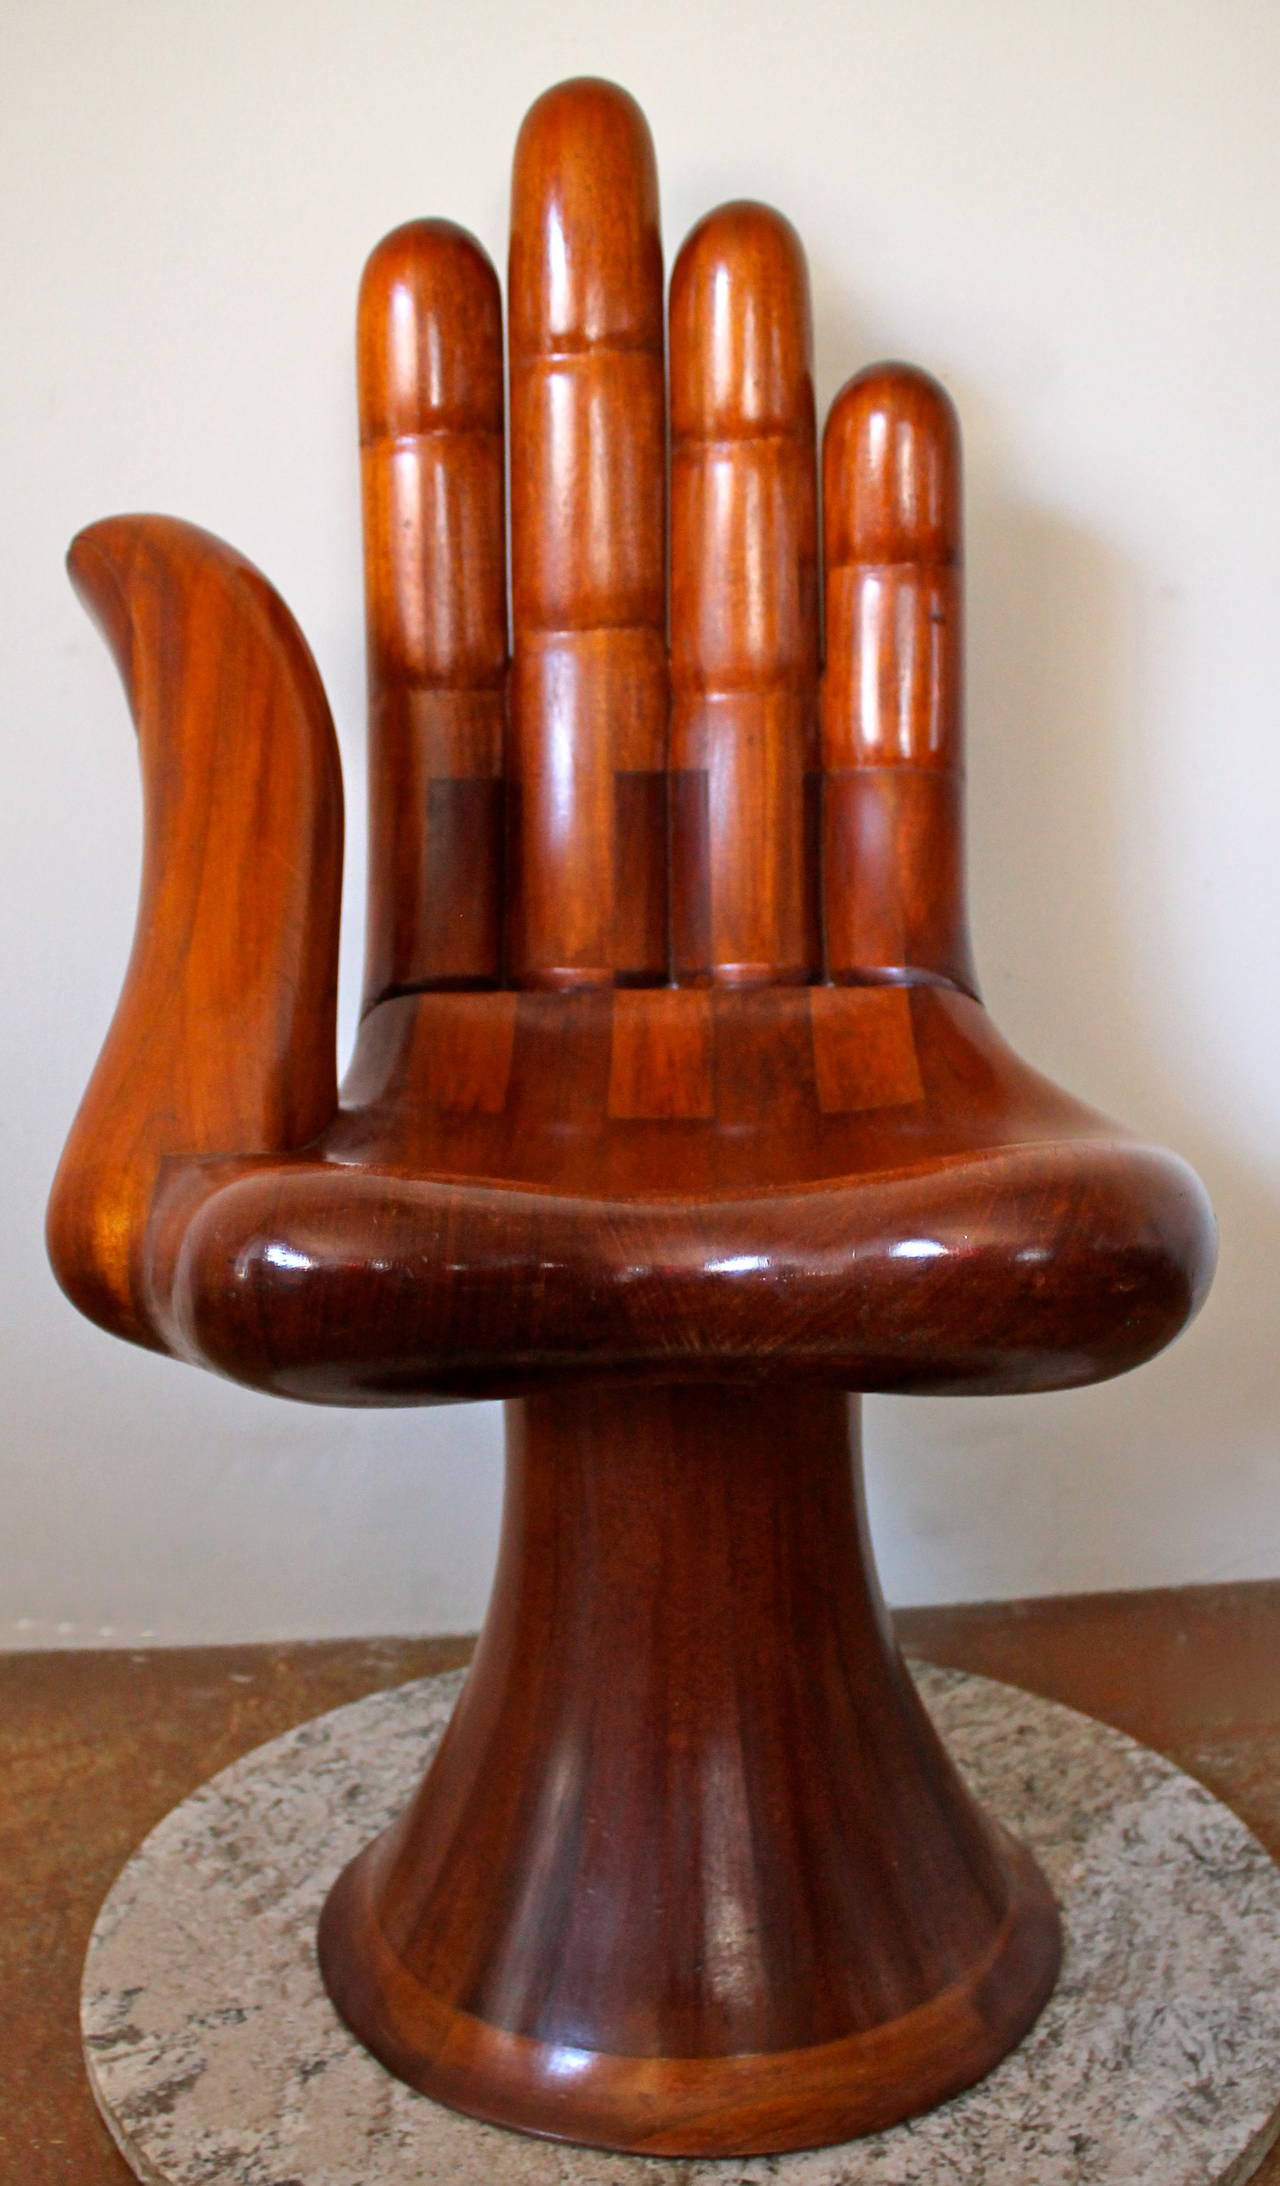 Iconic hand chair sculpture by Mexican Surrealist Pedro Friedeberg.
Carved in Mexico City, 1970.
Signed underside Pedro Friedeberg.
Chair comes with a certificate of authenticity handwritten from the artist.

Very hard to find an original 1970